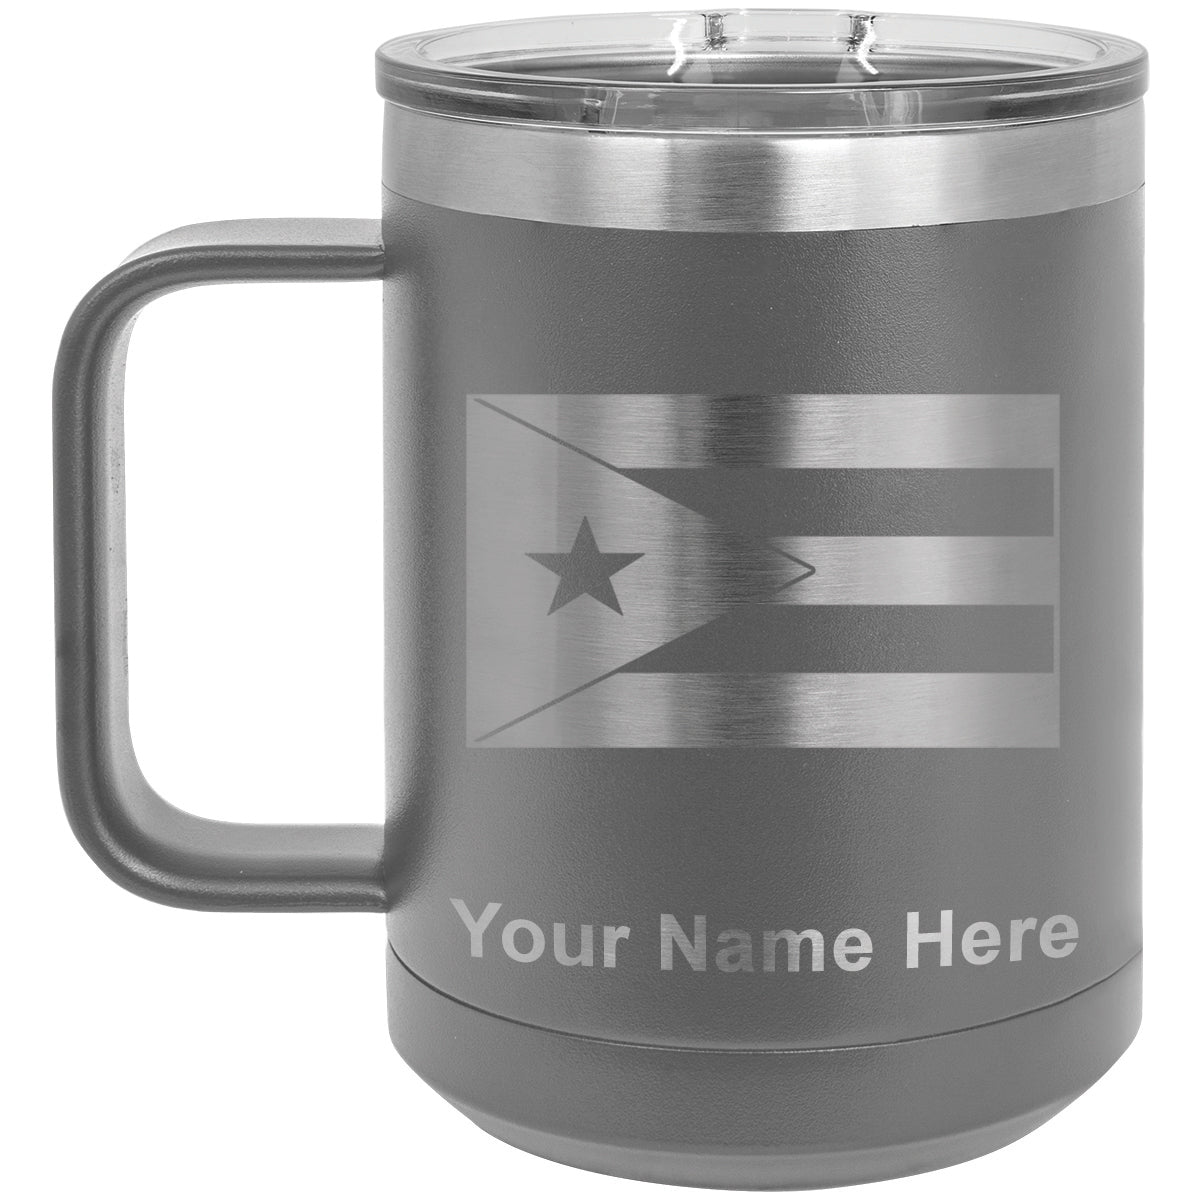 15oz Vacuum Insulated Coffee Mug, Flag of Puerto Rico, Personalized Engraving Included